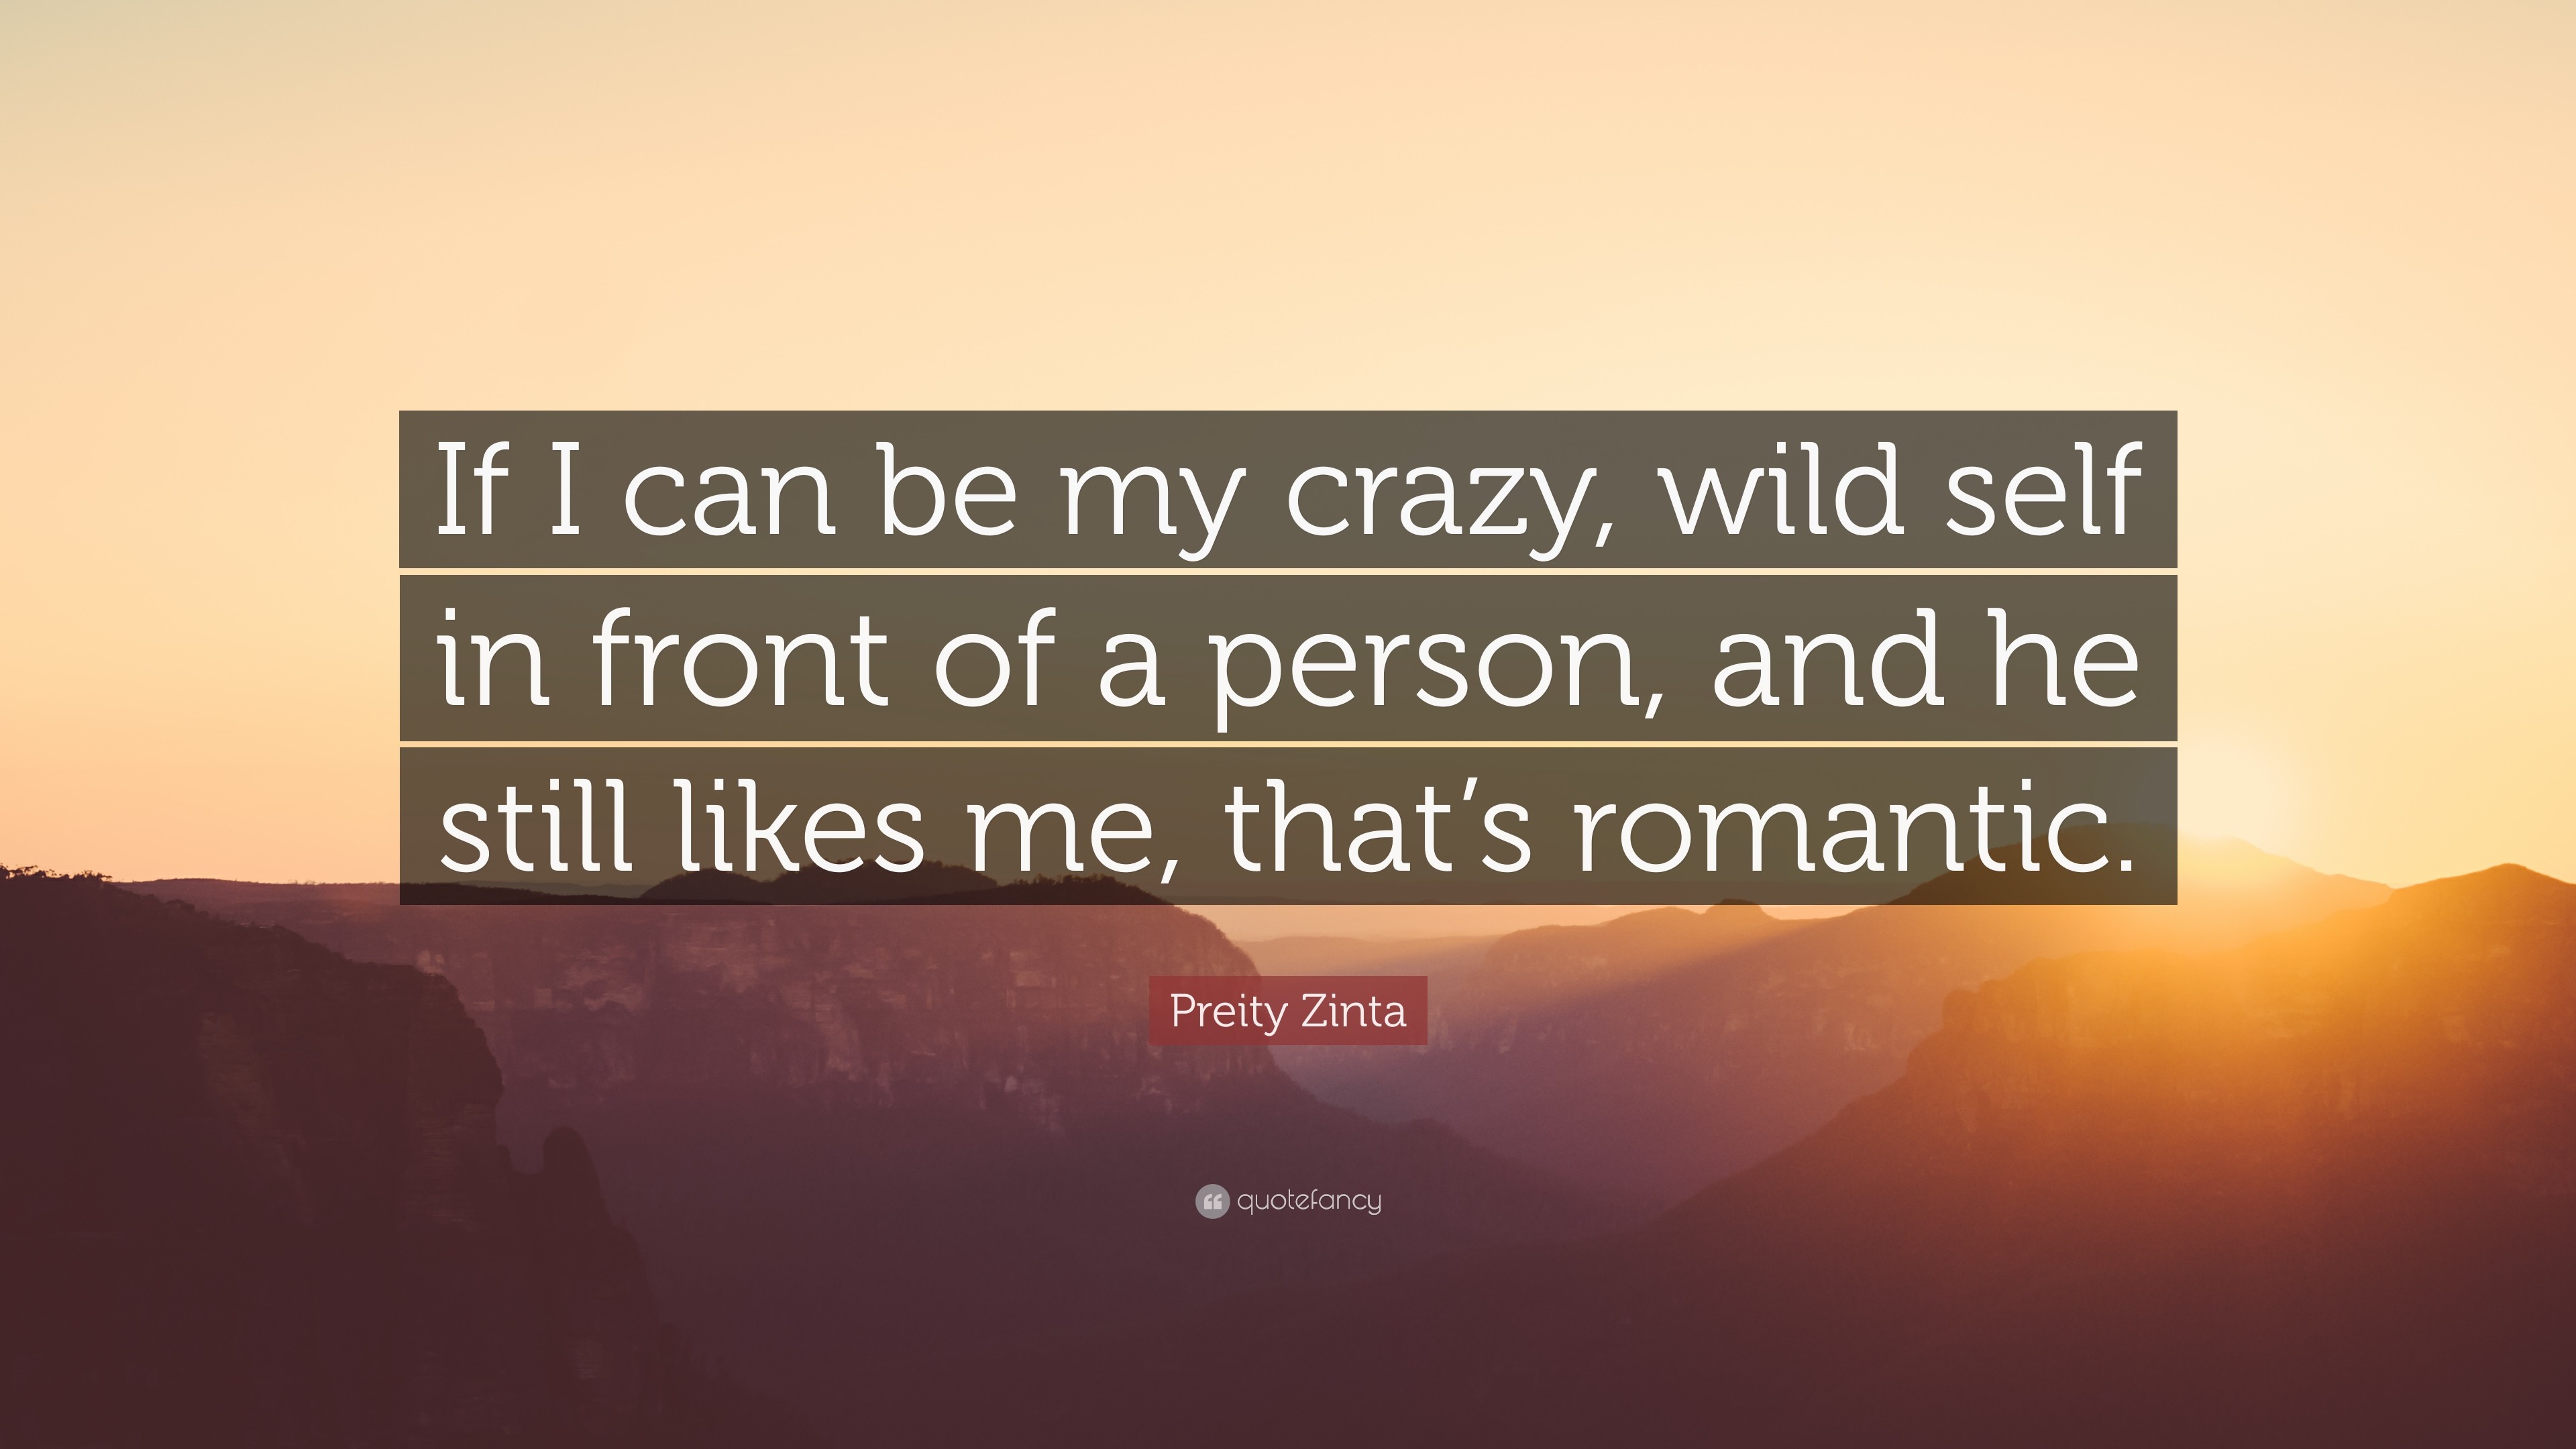 3840x2160 Preity Zinta Quote: “If I can be my crazy, wild self in front